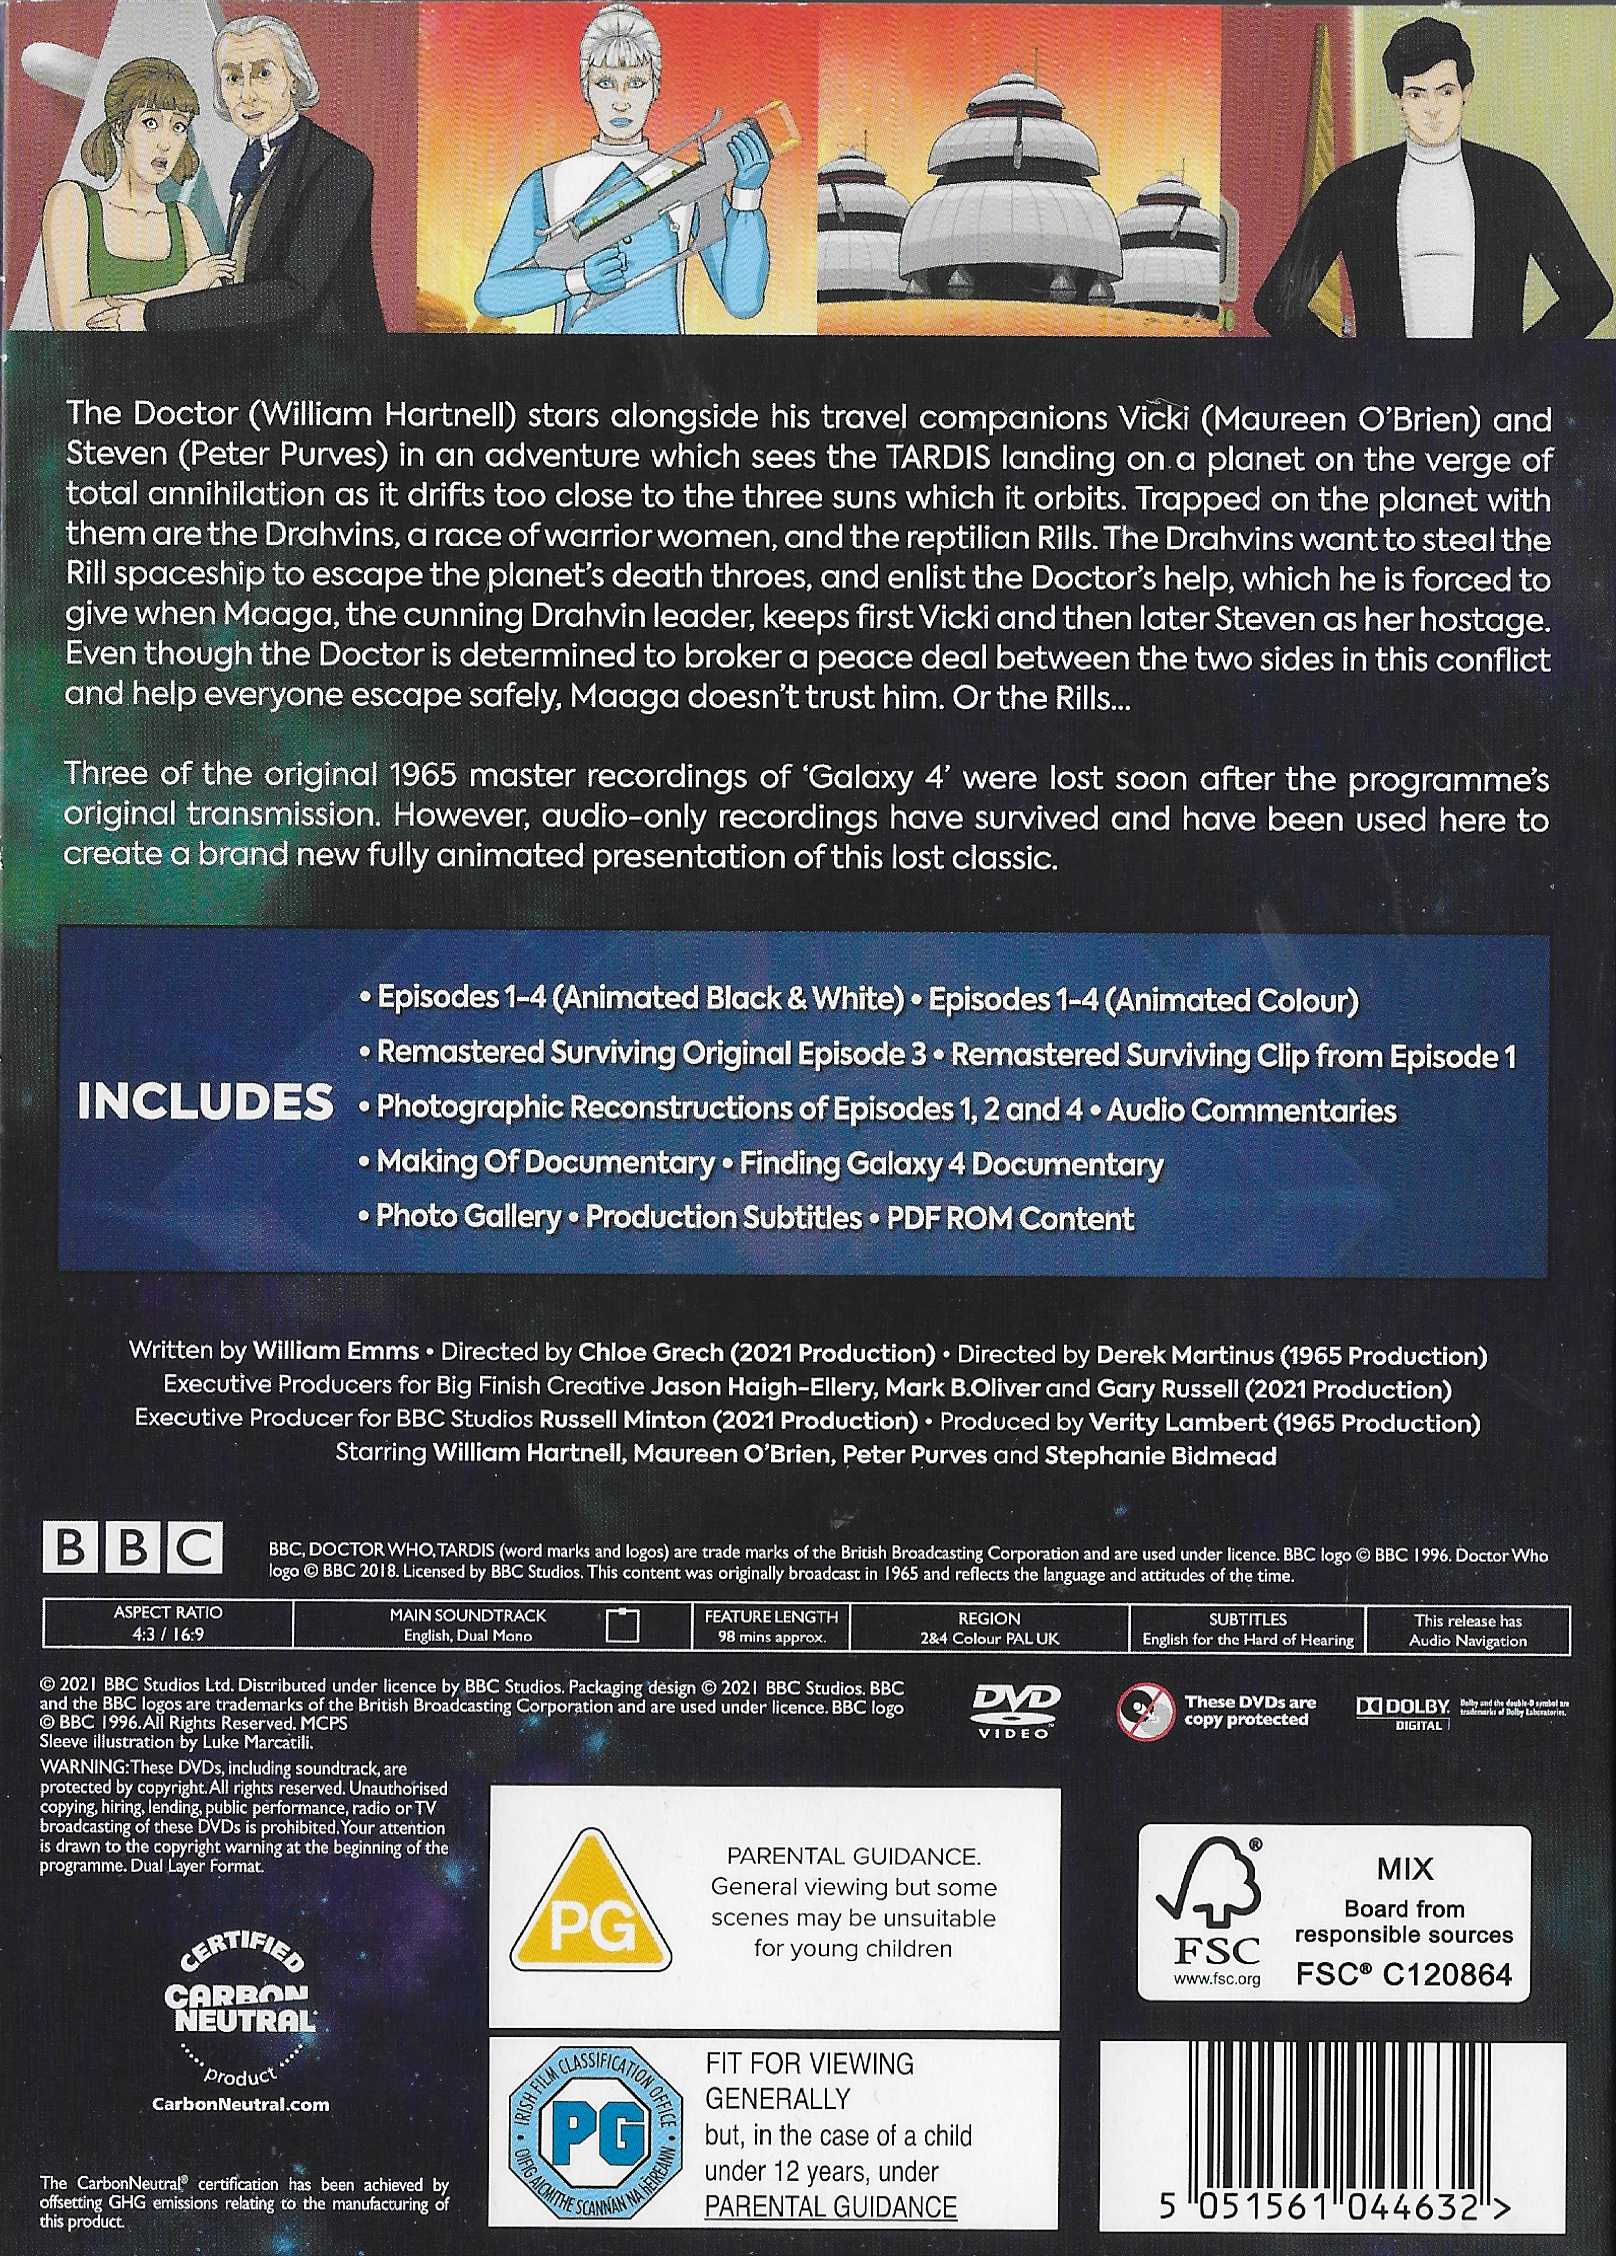 Picture of BBCDVD 4463 Doctor Who - Galaxy 4 by artist William Emms from the BBC records and Tapes library